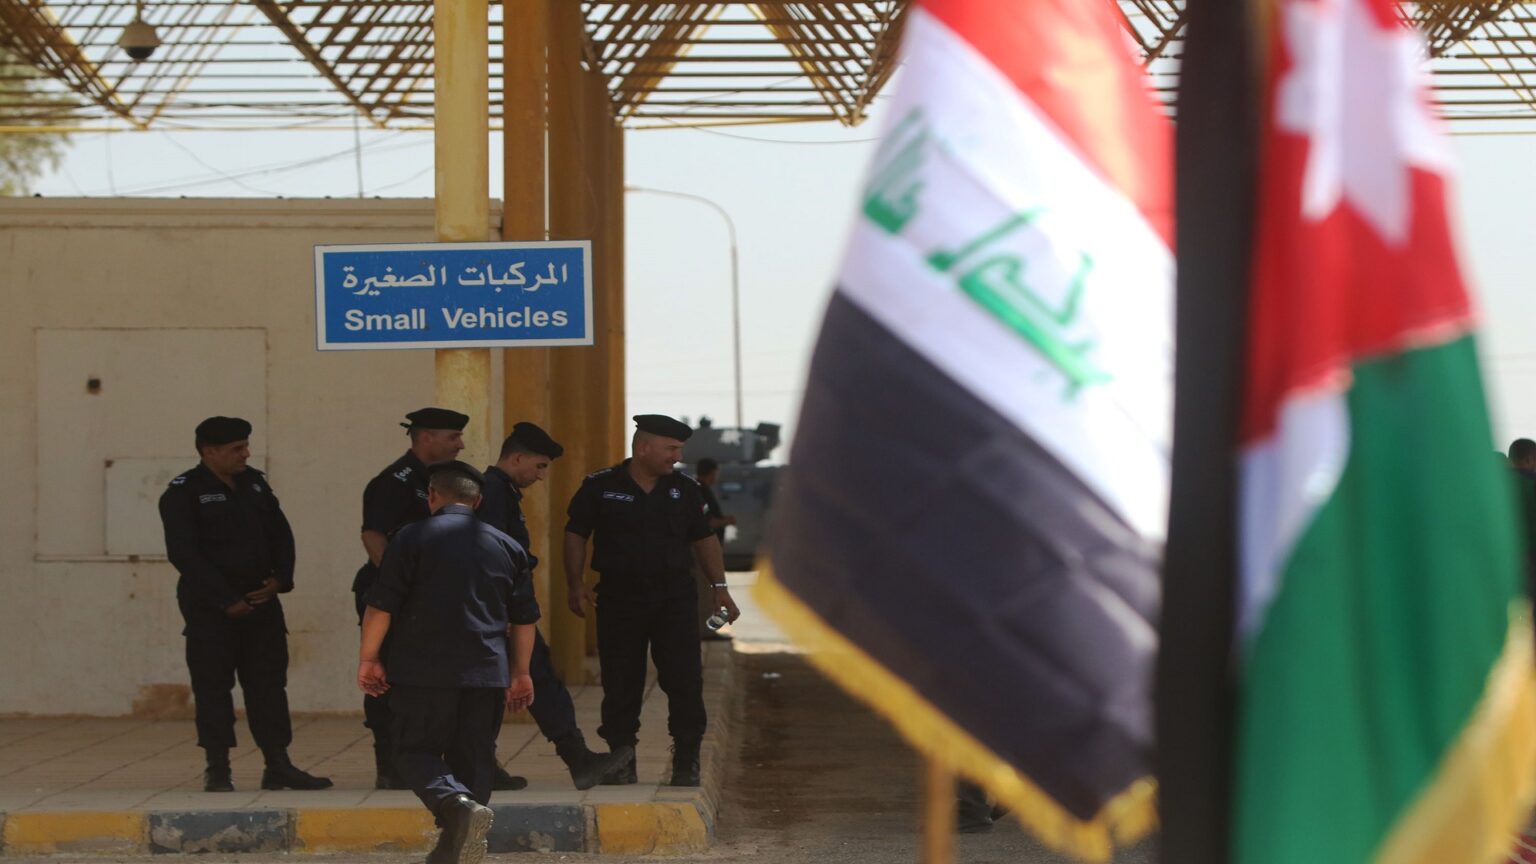 The Iraqi Customs said its total revenues in 2020 amounted to $824 million, a slight increase of $50 million above 2019.